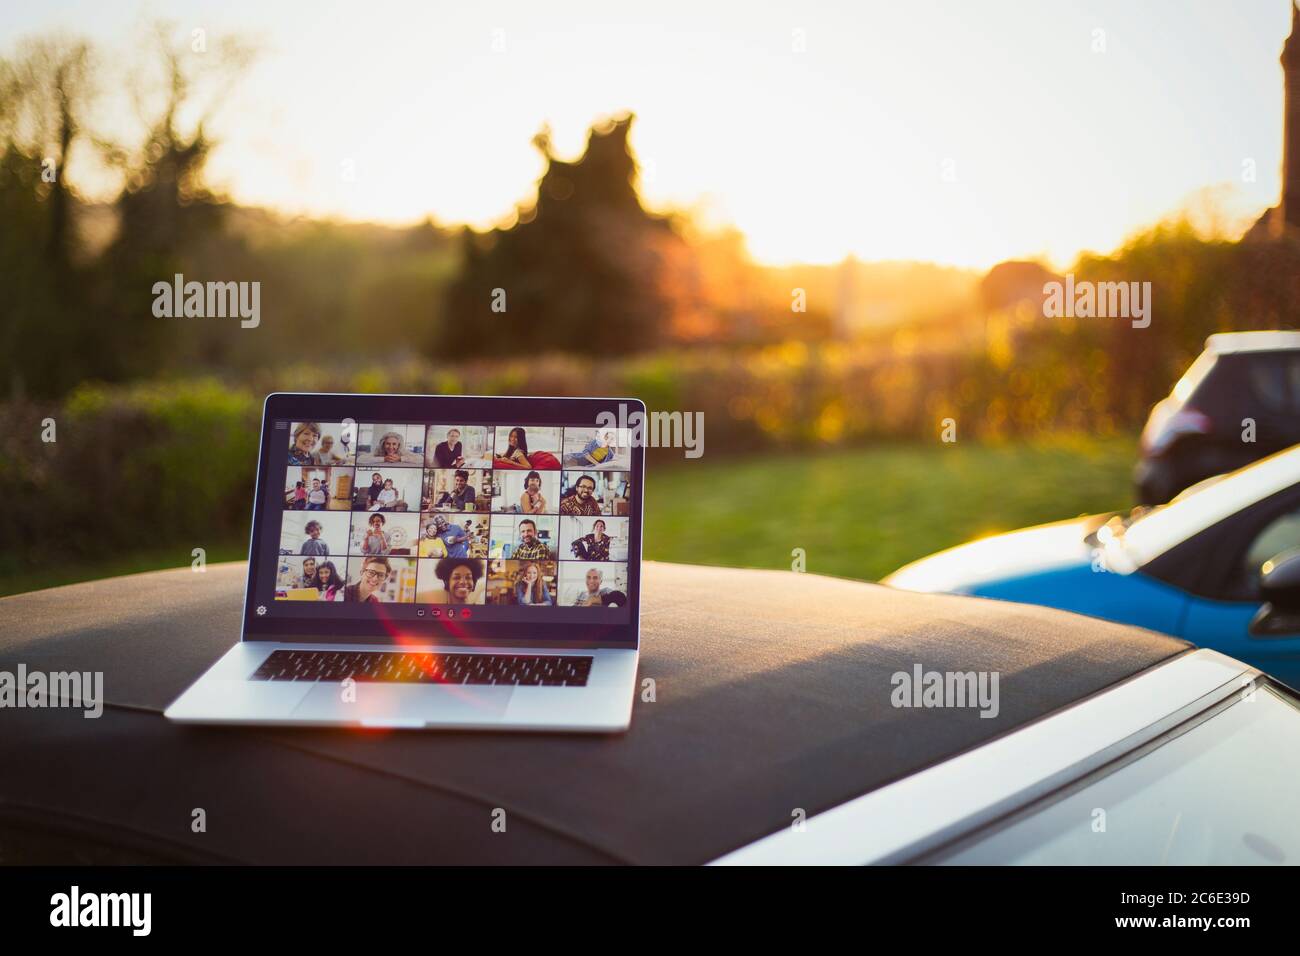 Friends video chatting on laptop screen on top of car Stock Photo